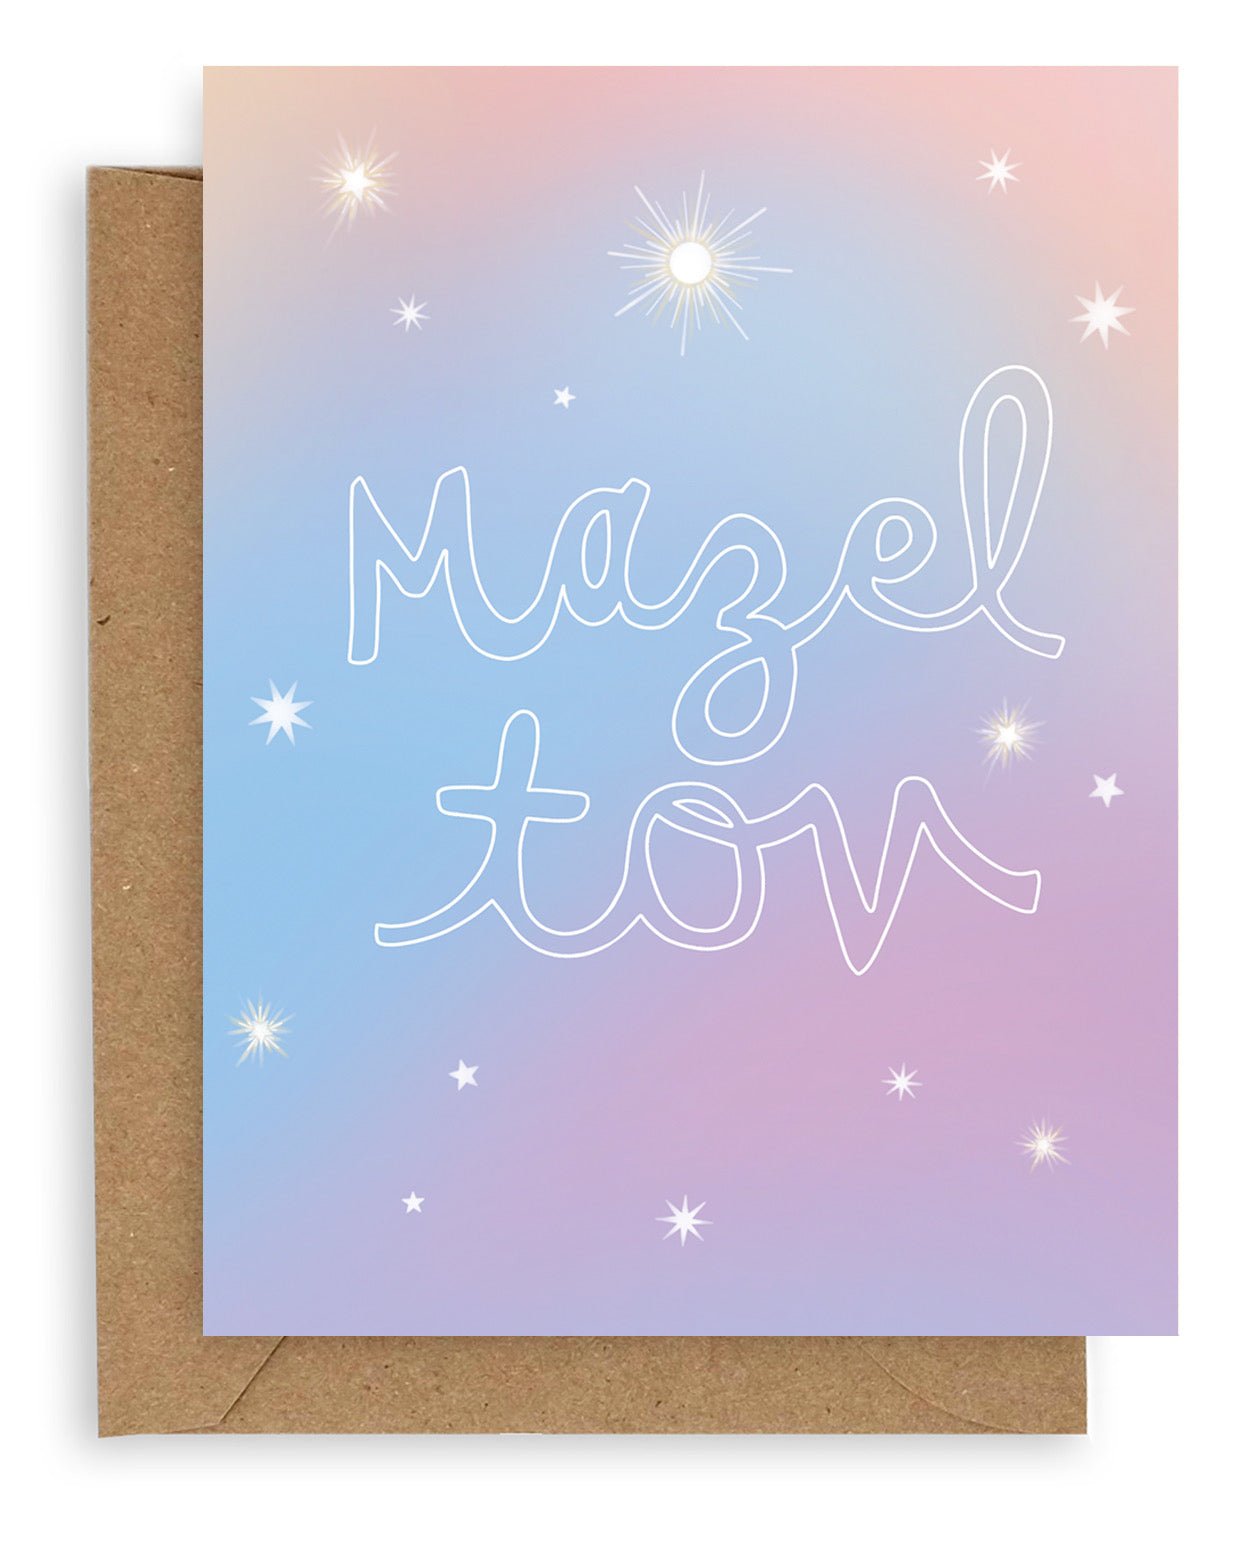 "Mazel Tov" in large, hollow cursive on a gradient blue-lavender background with various kinds of stars printed on cardstock with a kraft envelope.